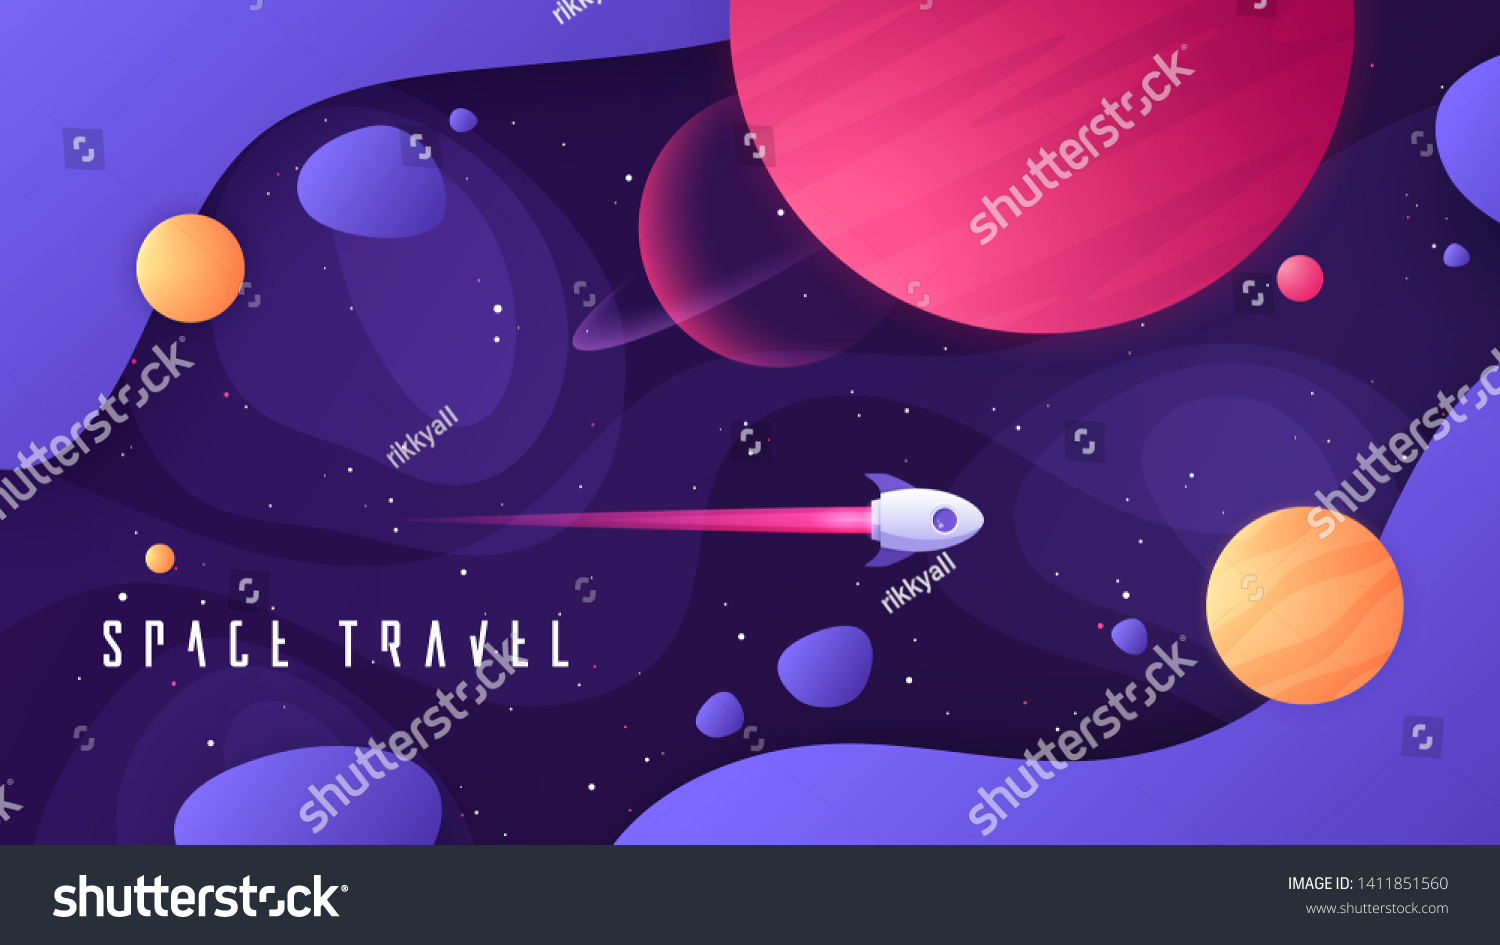 Vector illustration on the topic of outer space, interstellar travels, universe and distant galaxies. #1411851560